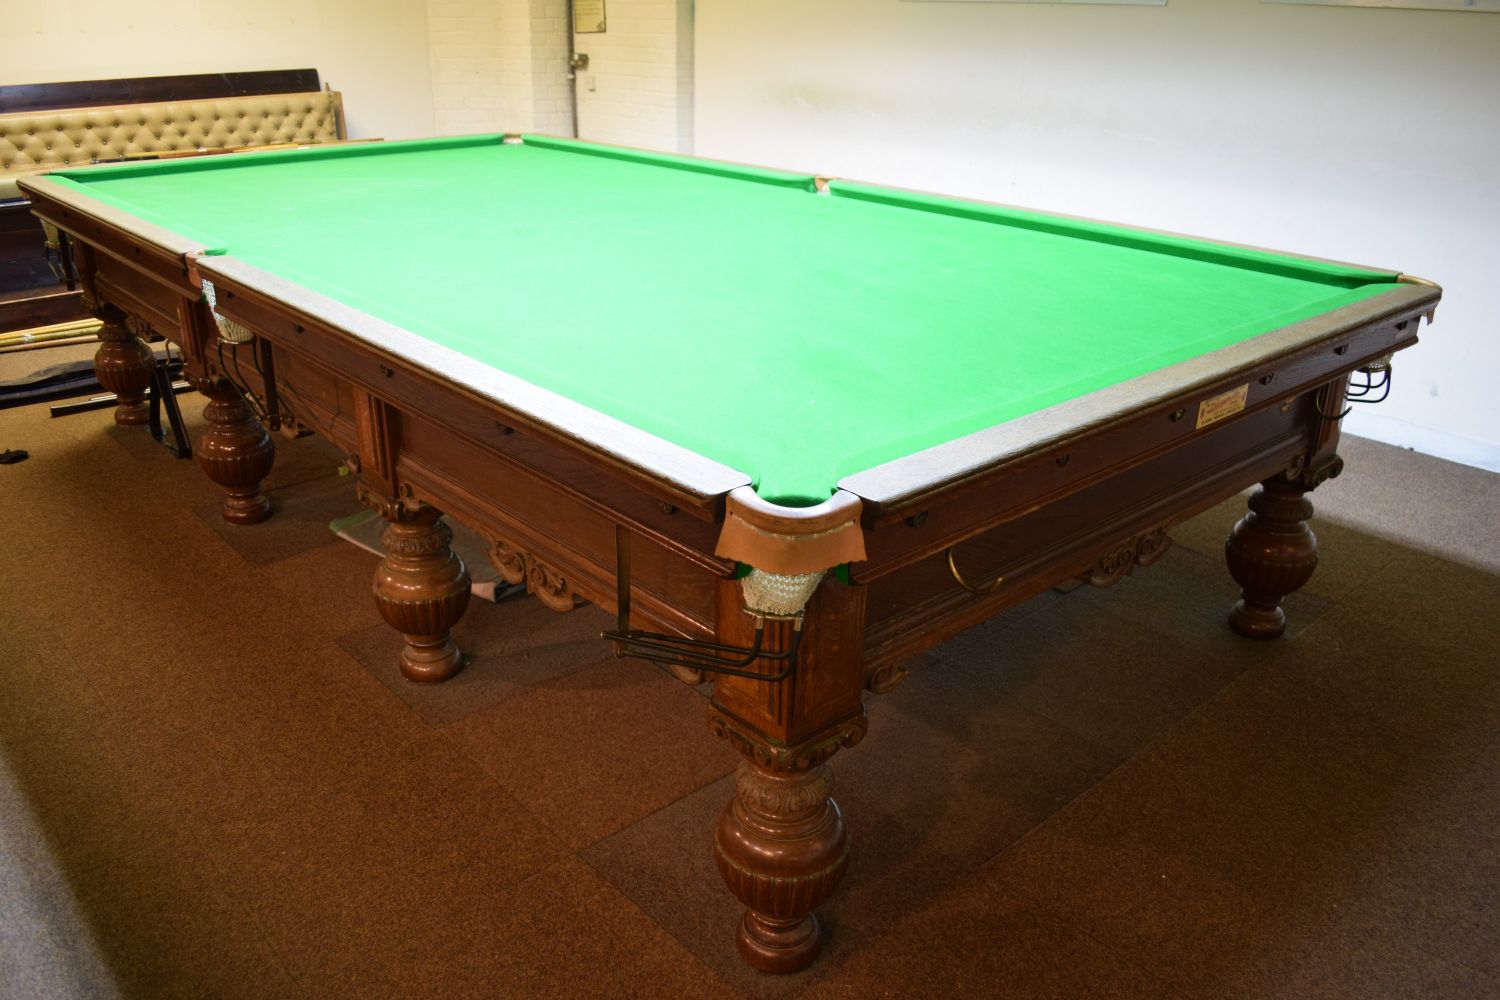 Snooker Tables & Snooker Club Contents